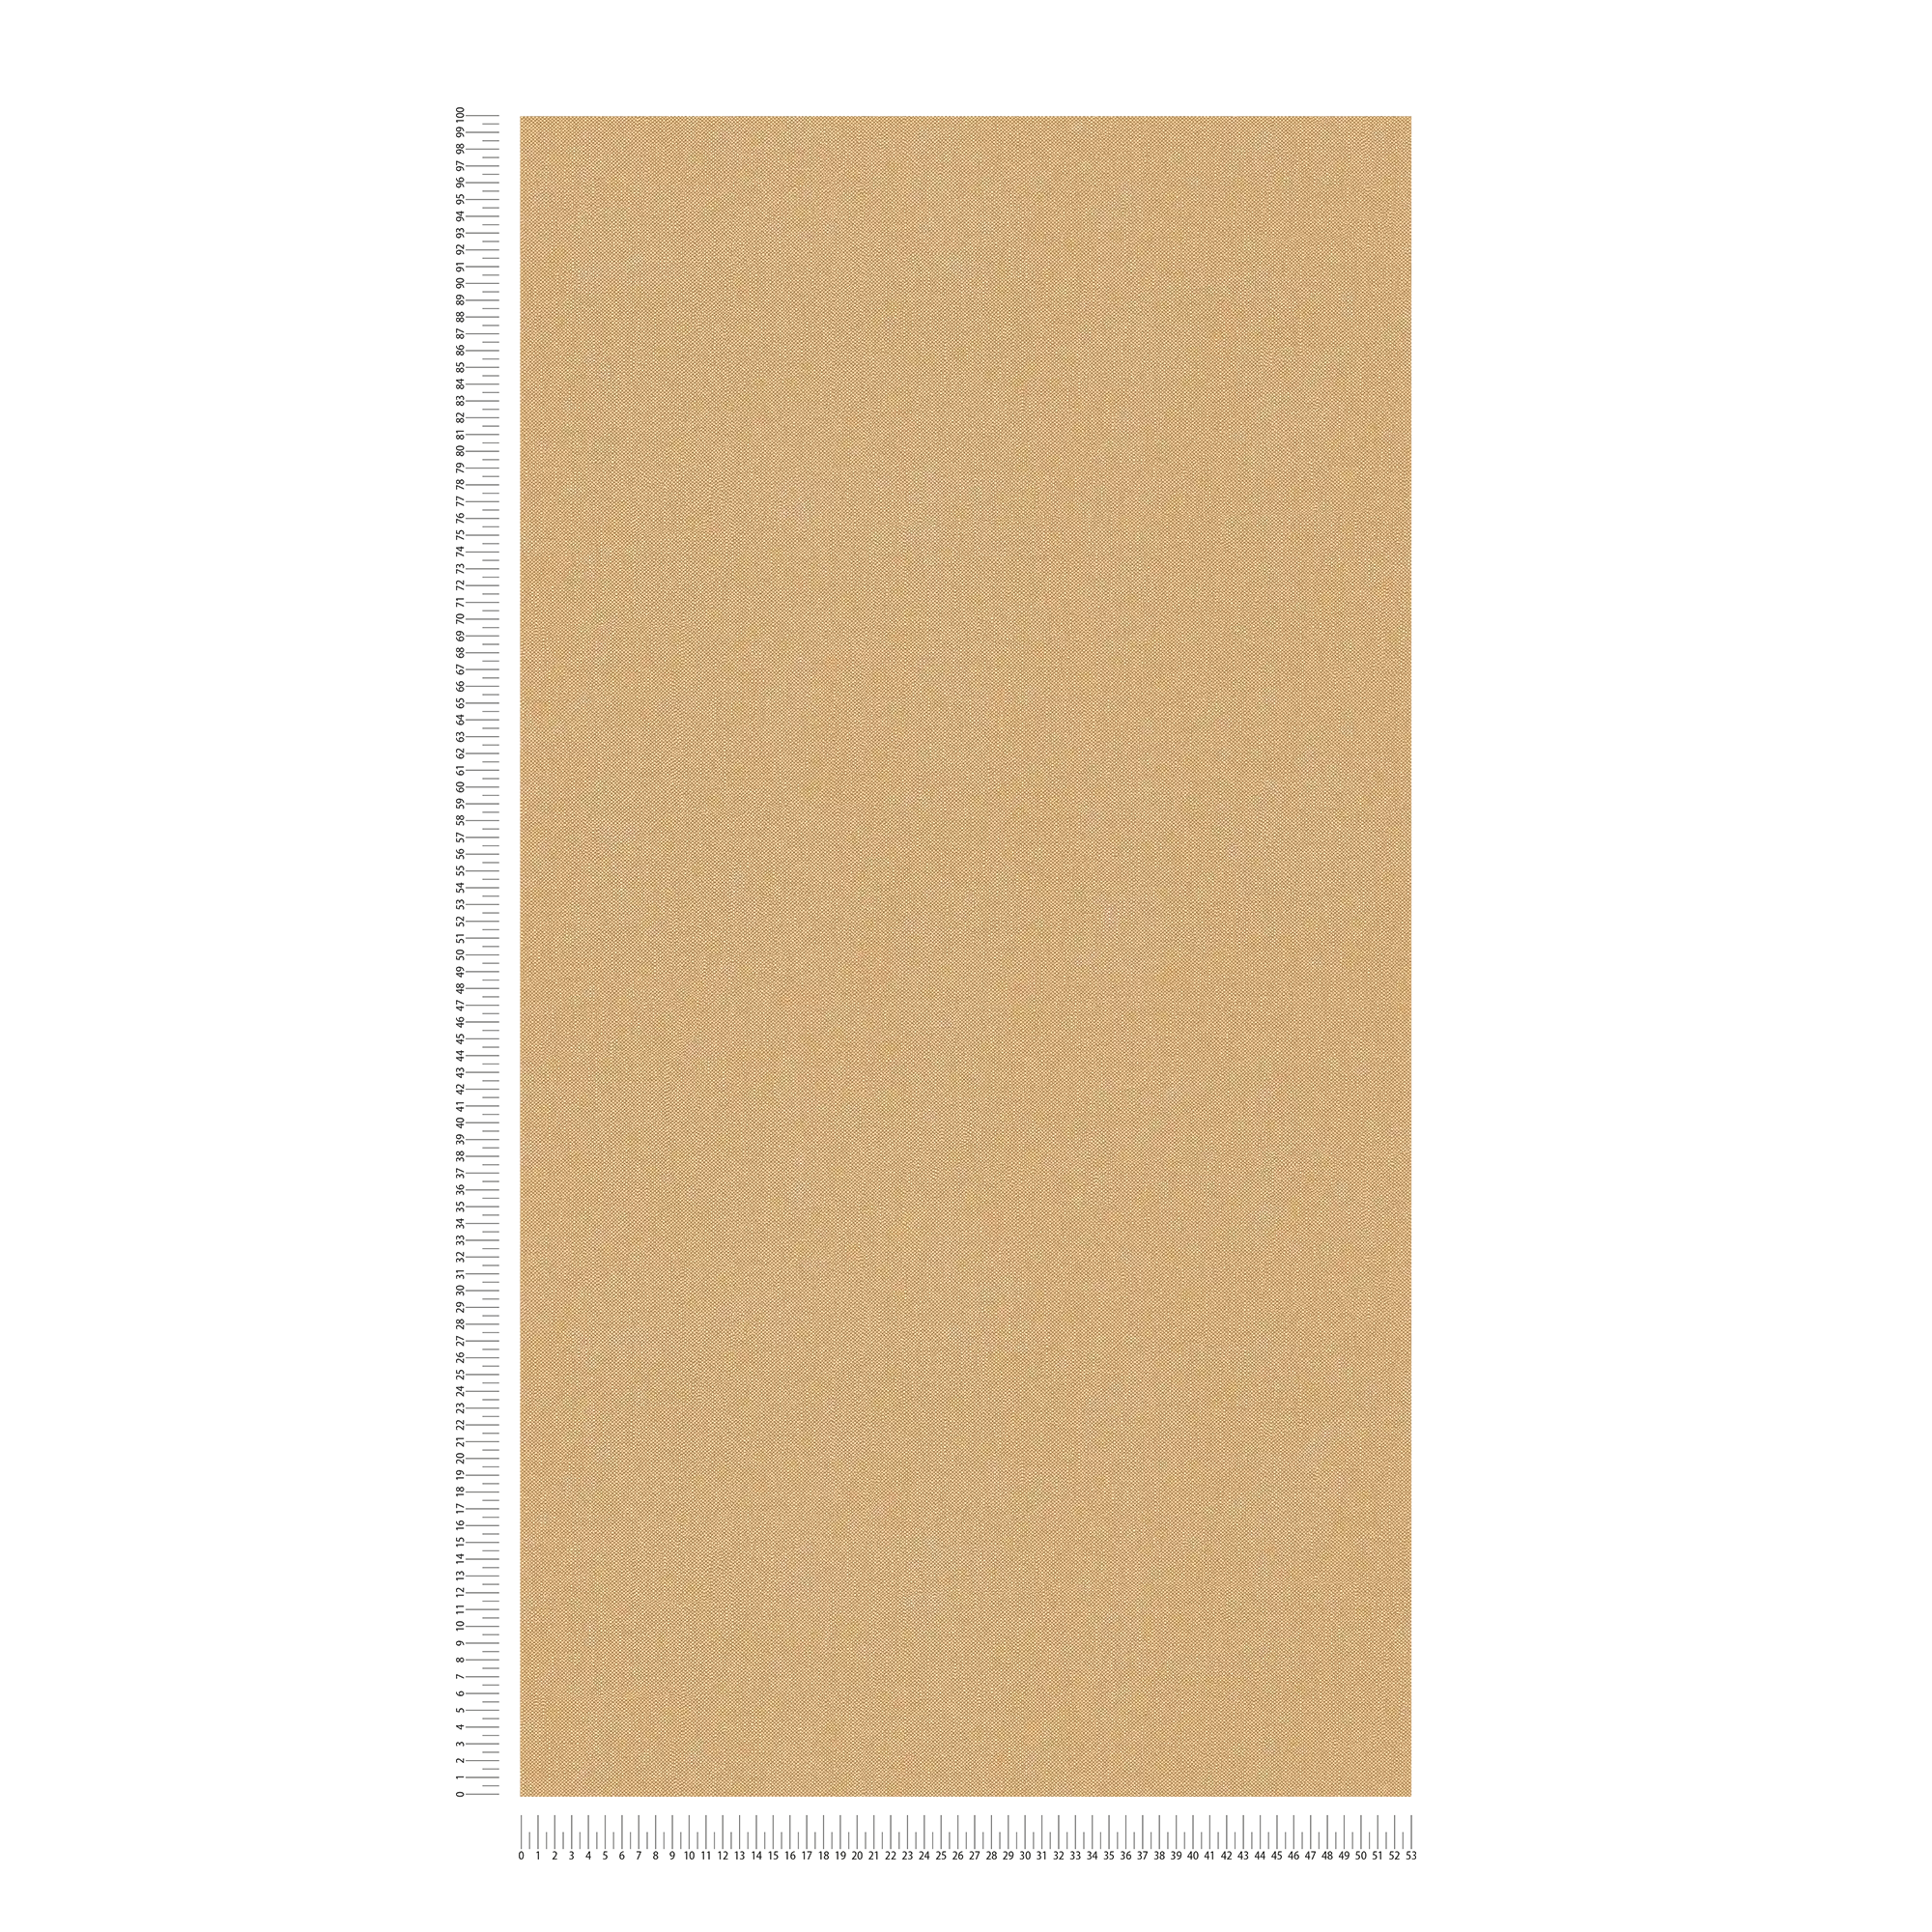             Plain wallpaper with fine structure - brown, yellow
        